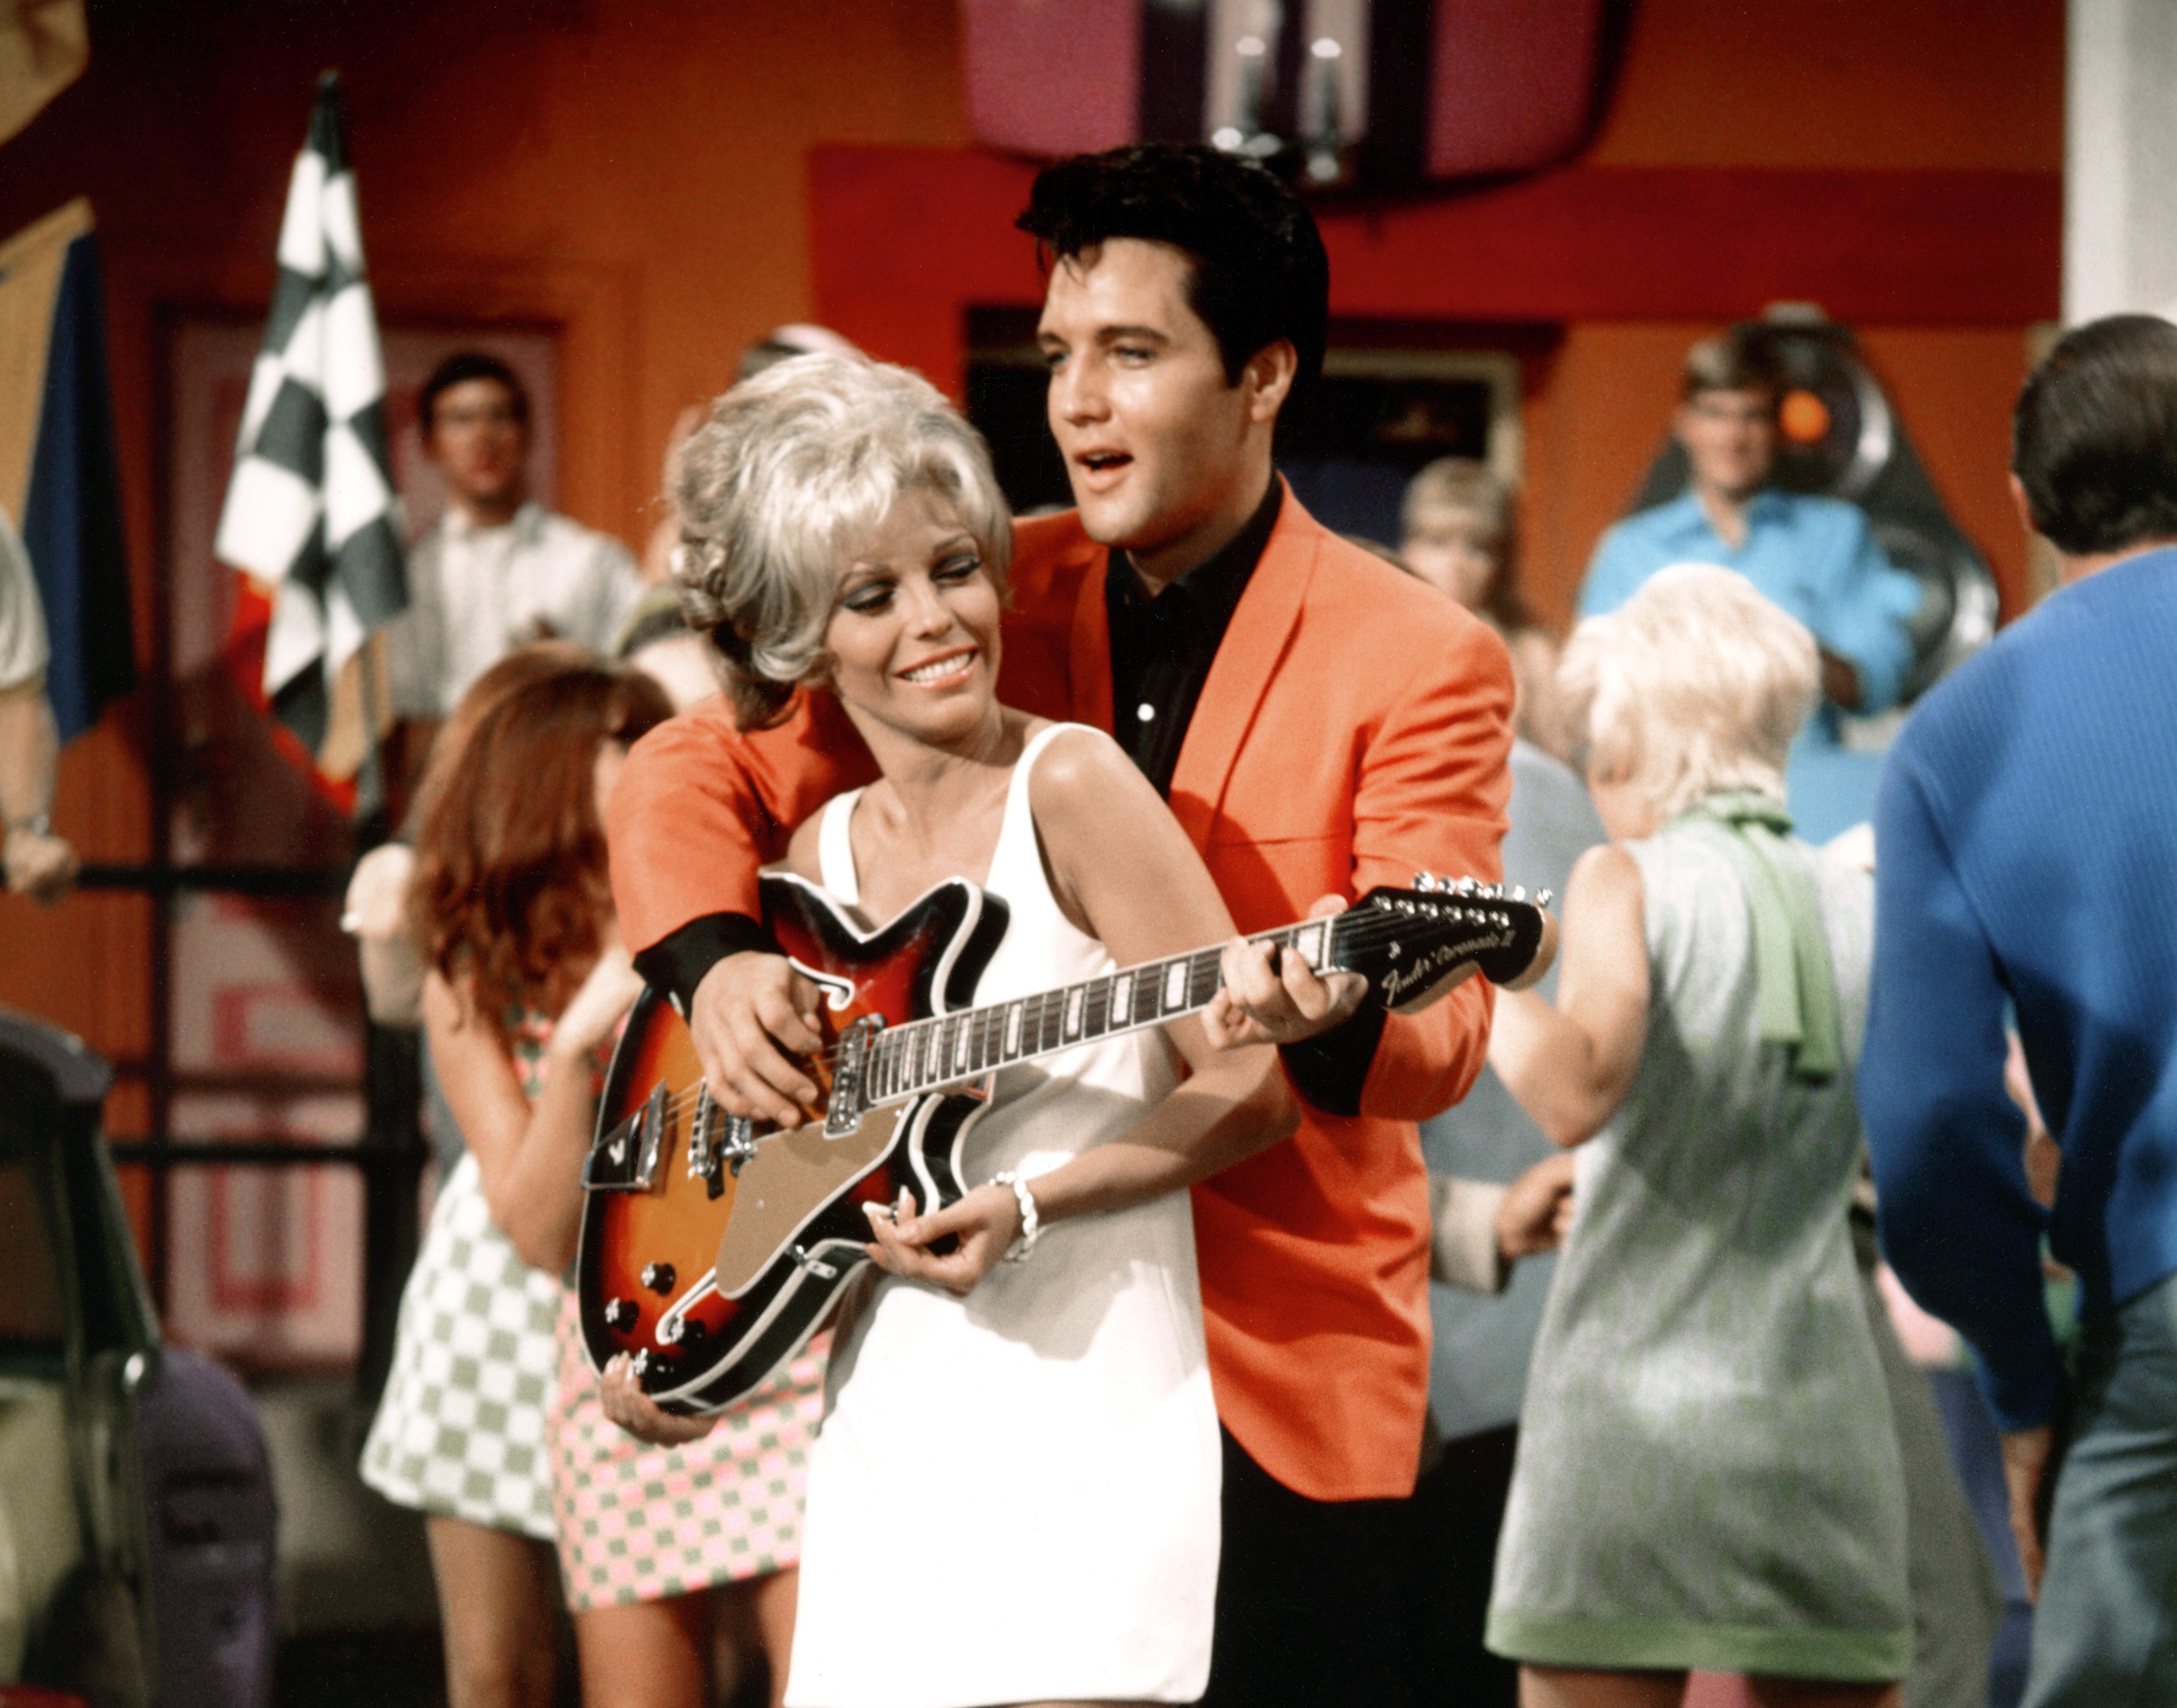 Nancy Sinatra wears a white dress and stands in front of Elvis, who holds his guitar in front of her.